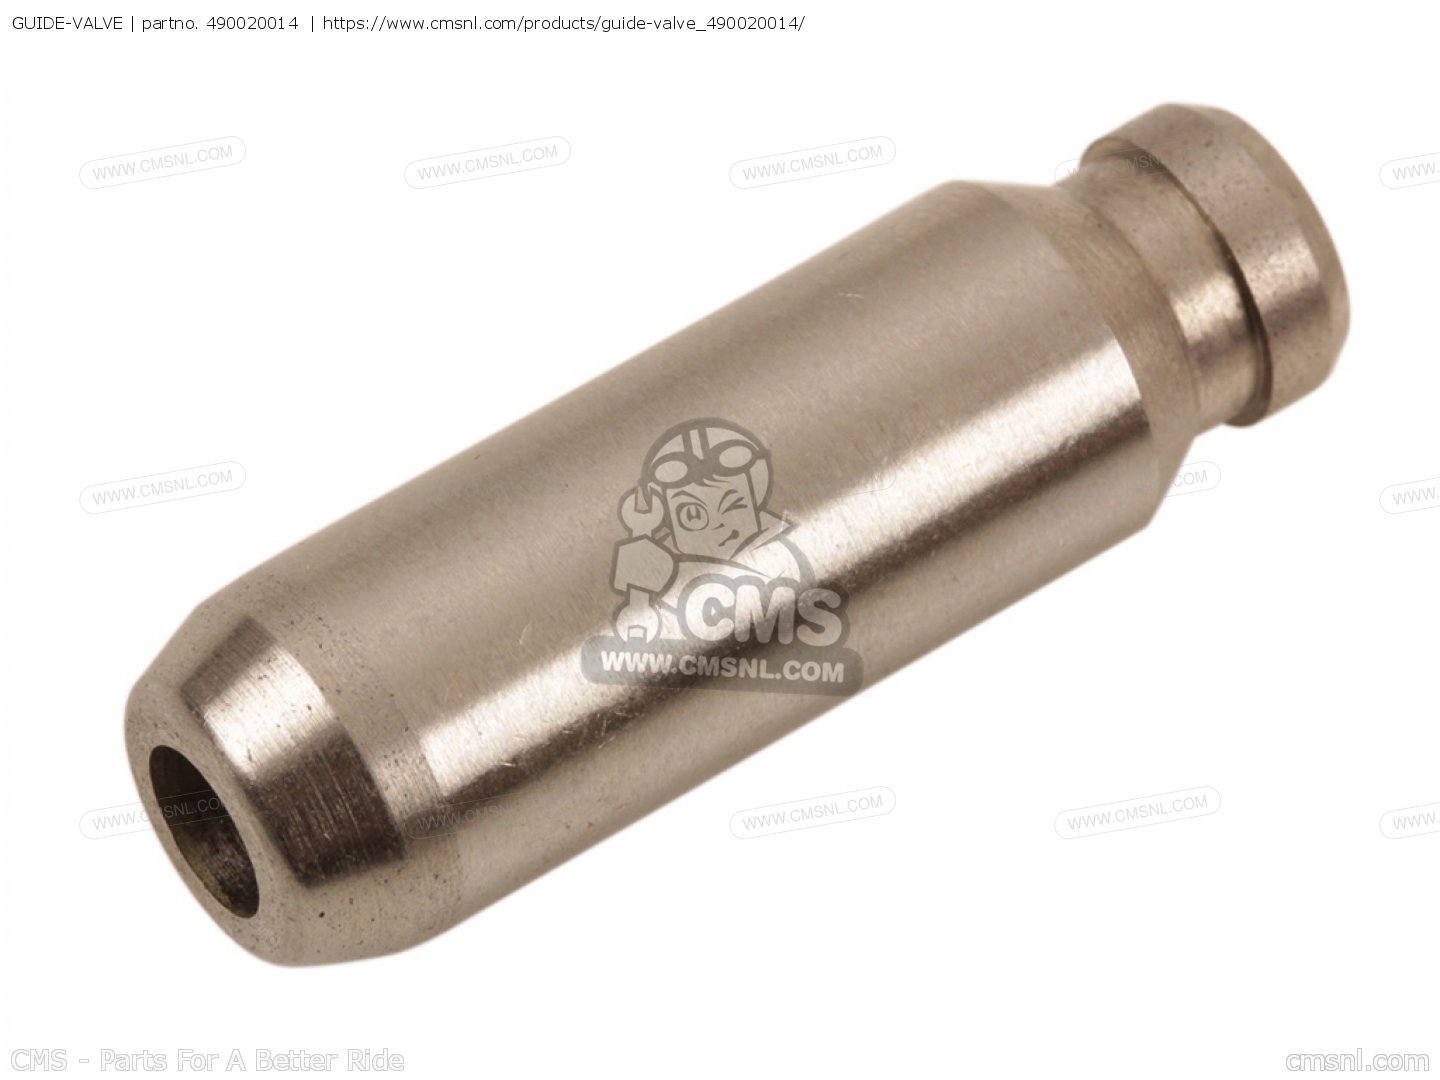 GUIDE-VALVE for ZX1400C8F NINJA ZX14 2008 USA - order at CMSNL